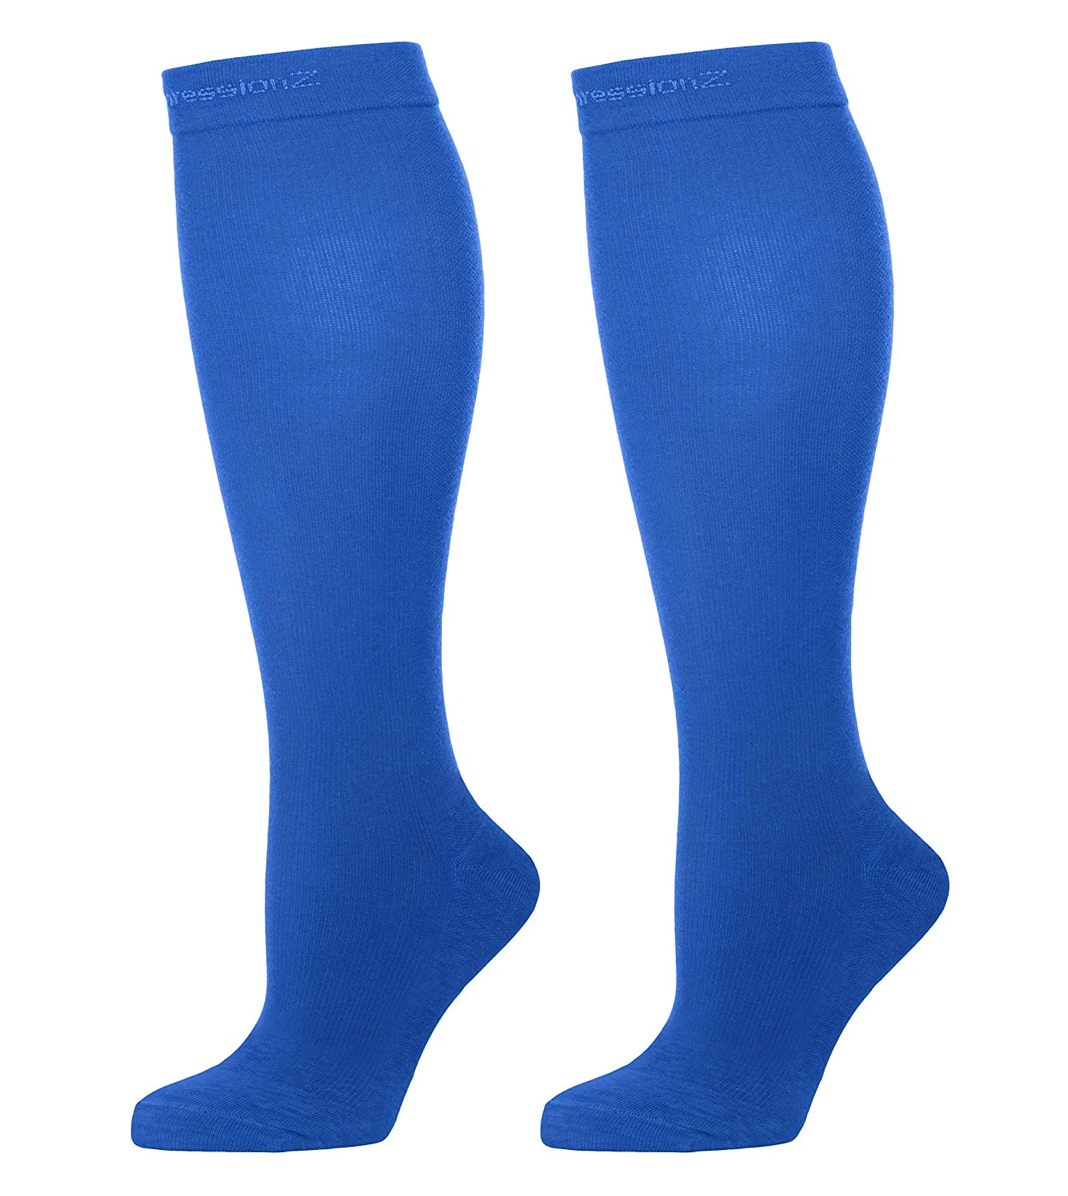 Socks for Swollen Feet - (Buy These and Reduce Swelling Fast!)